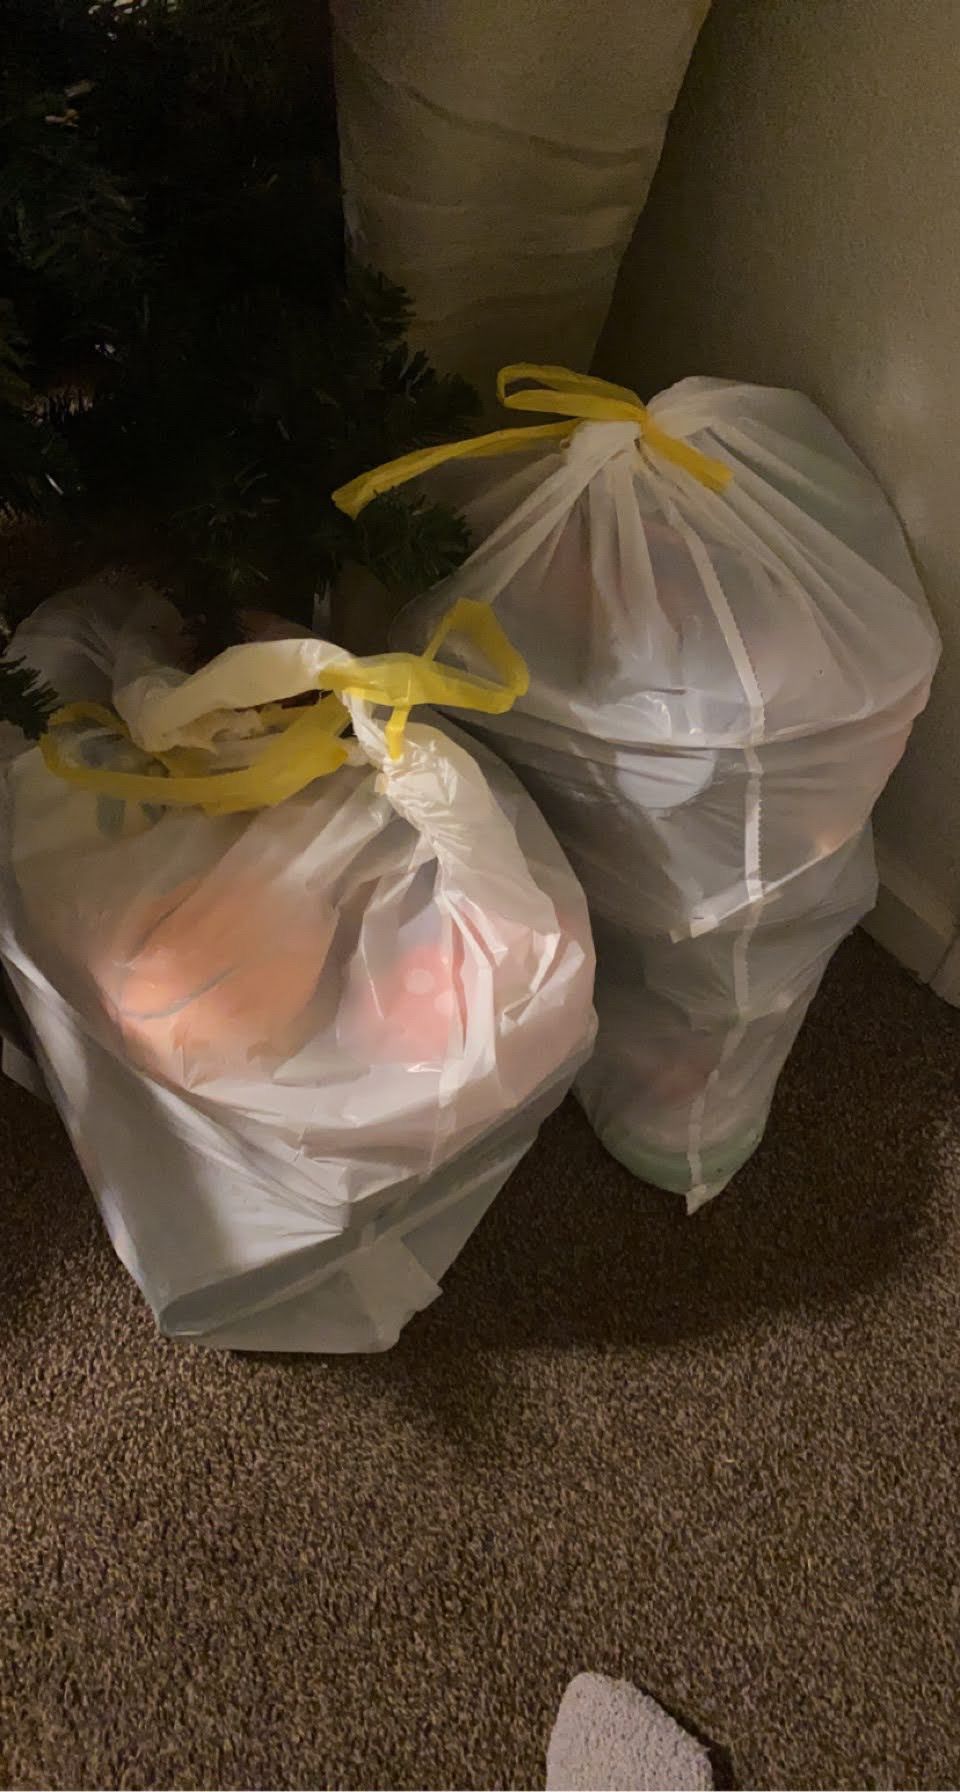 2 Giant Bags of Toys